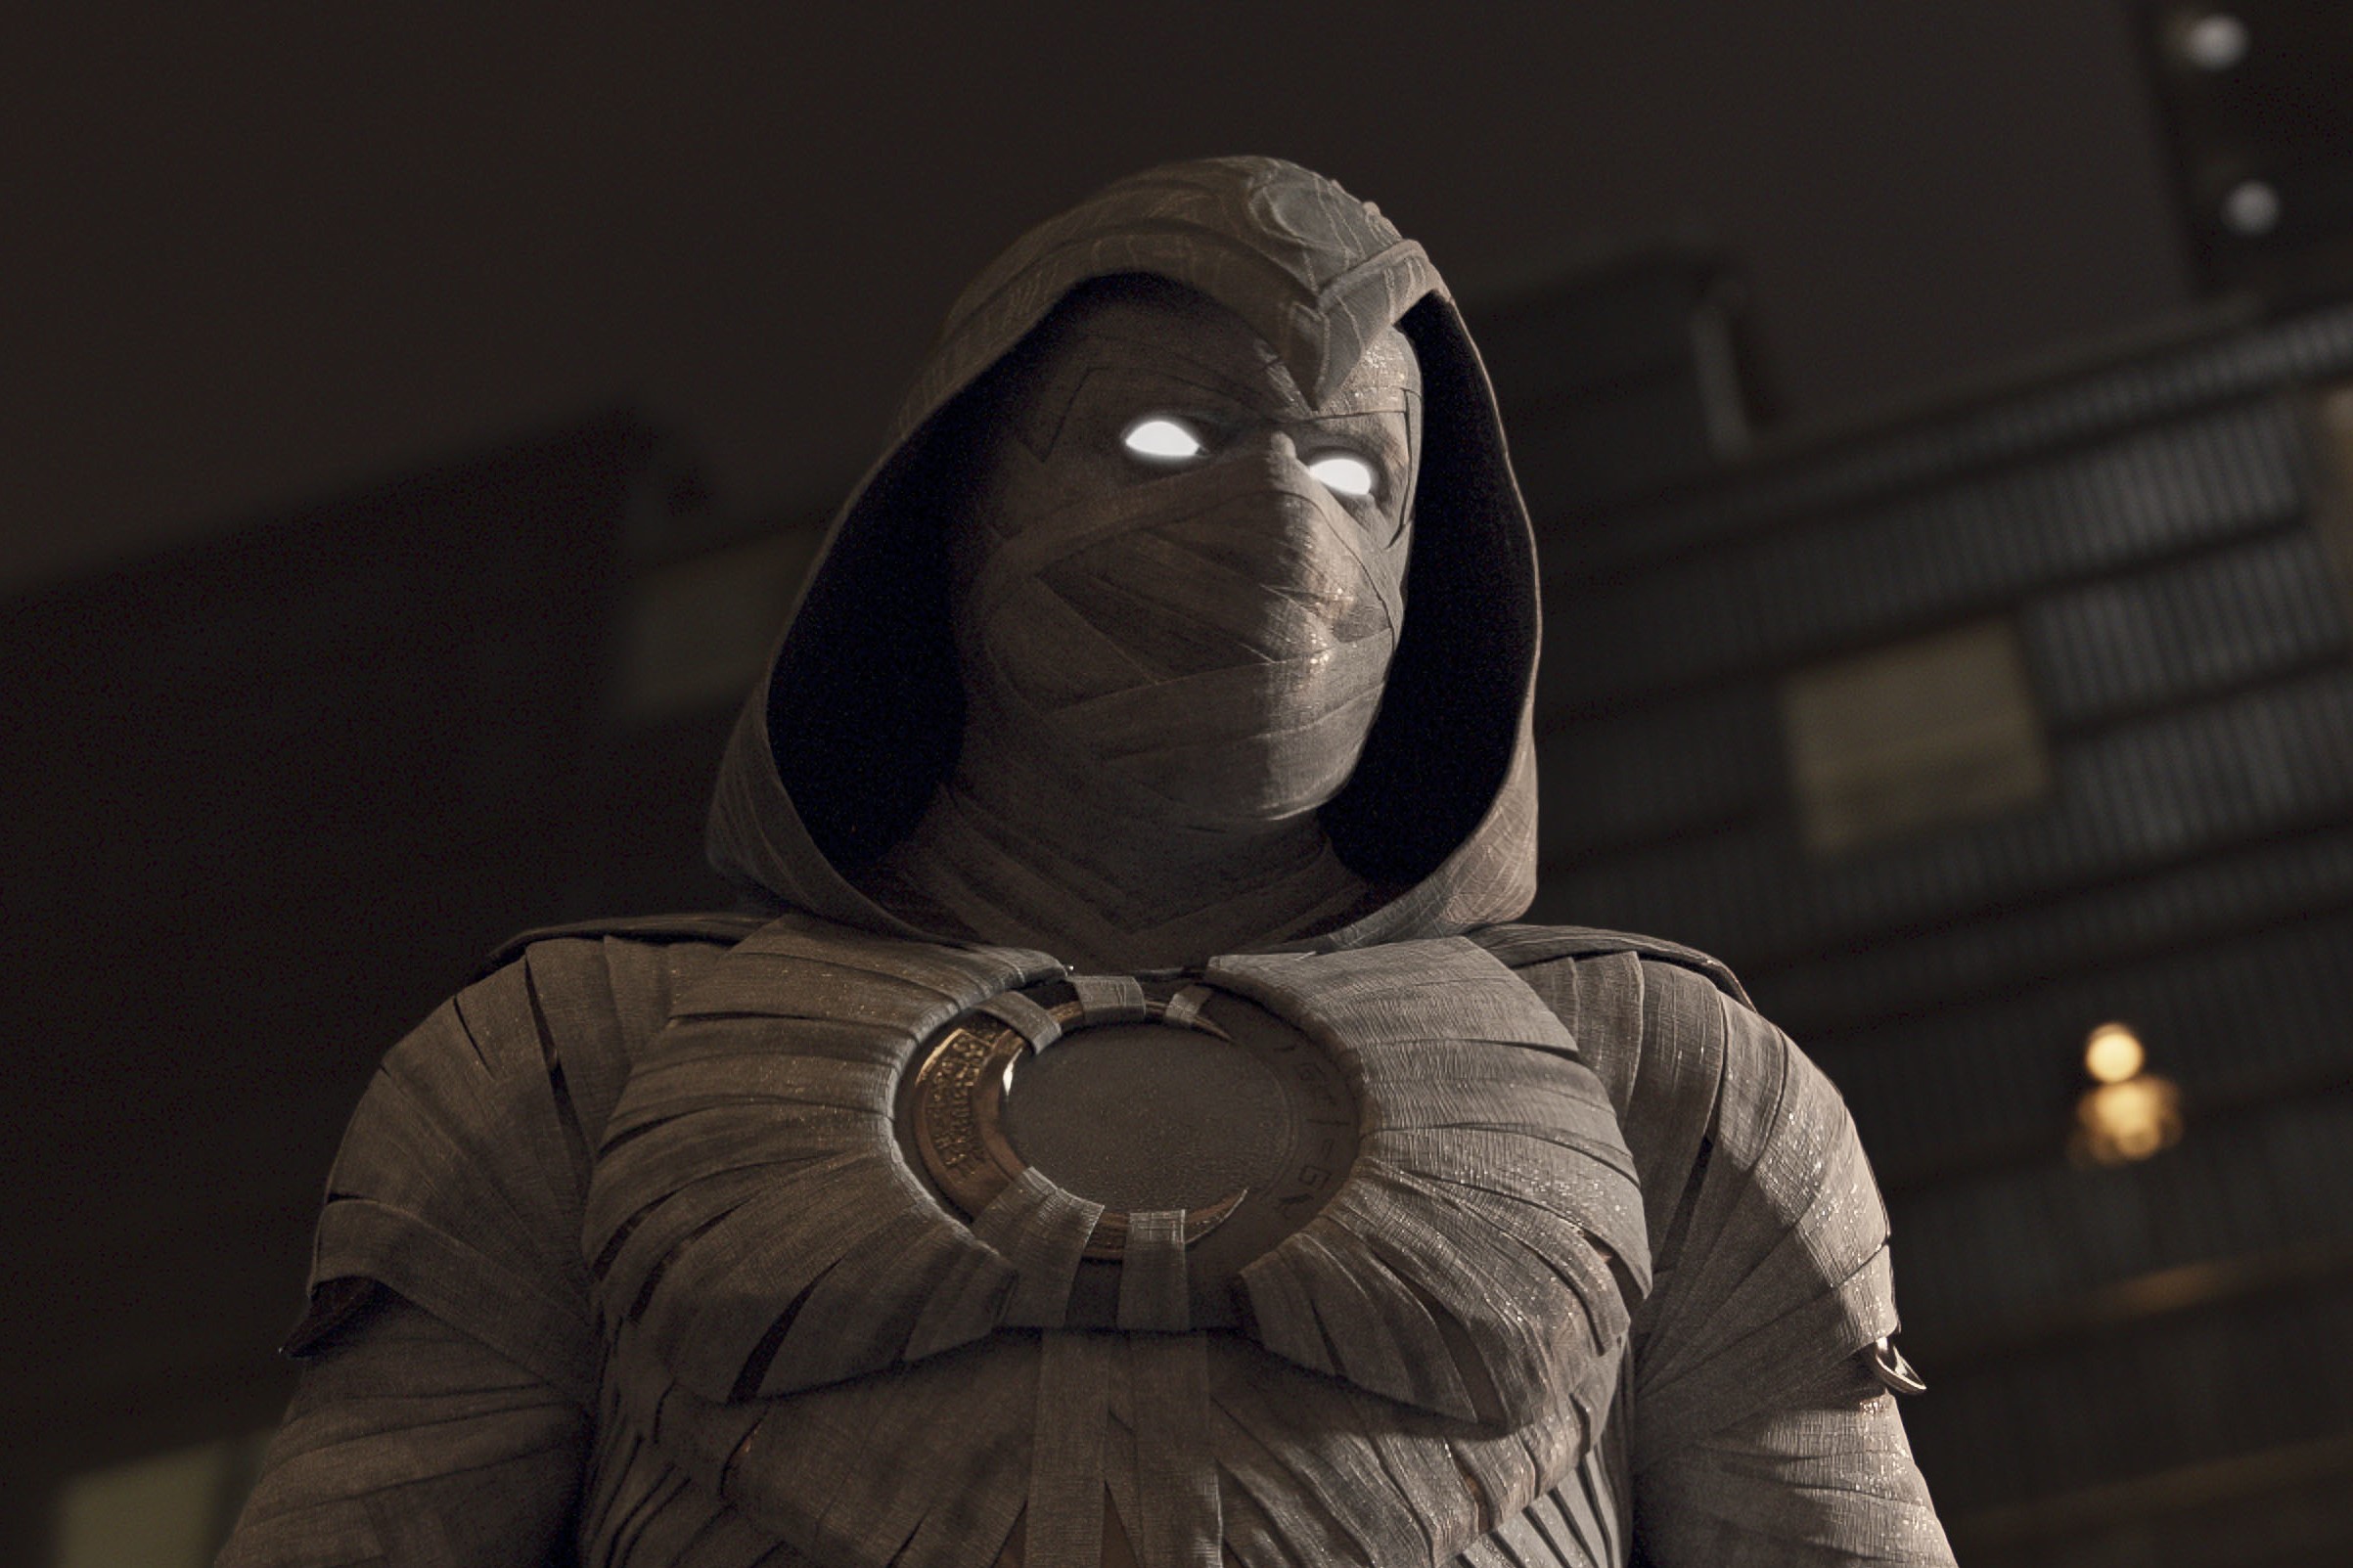 'Moon Knight' star Oscar Isaac, in character as Marc Spector, wears his white Moon Knight suit.